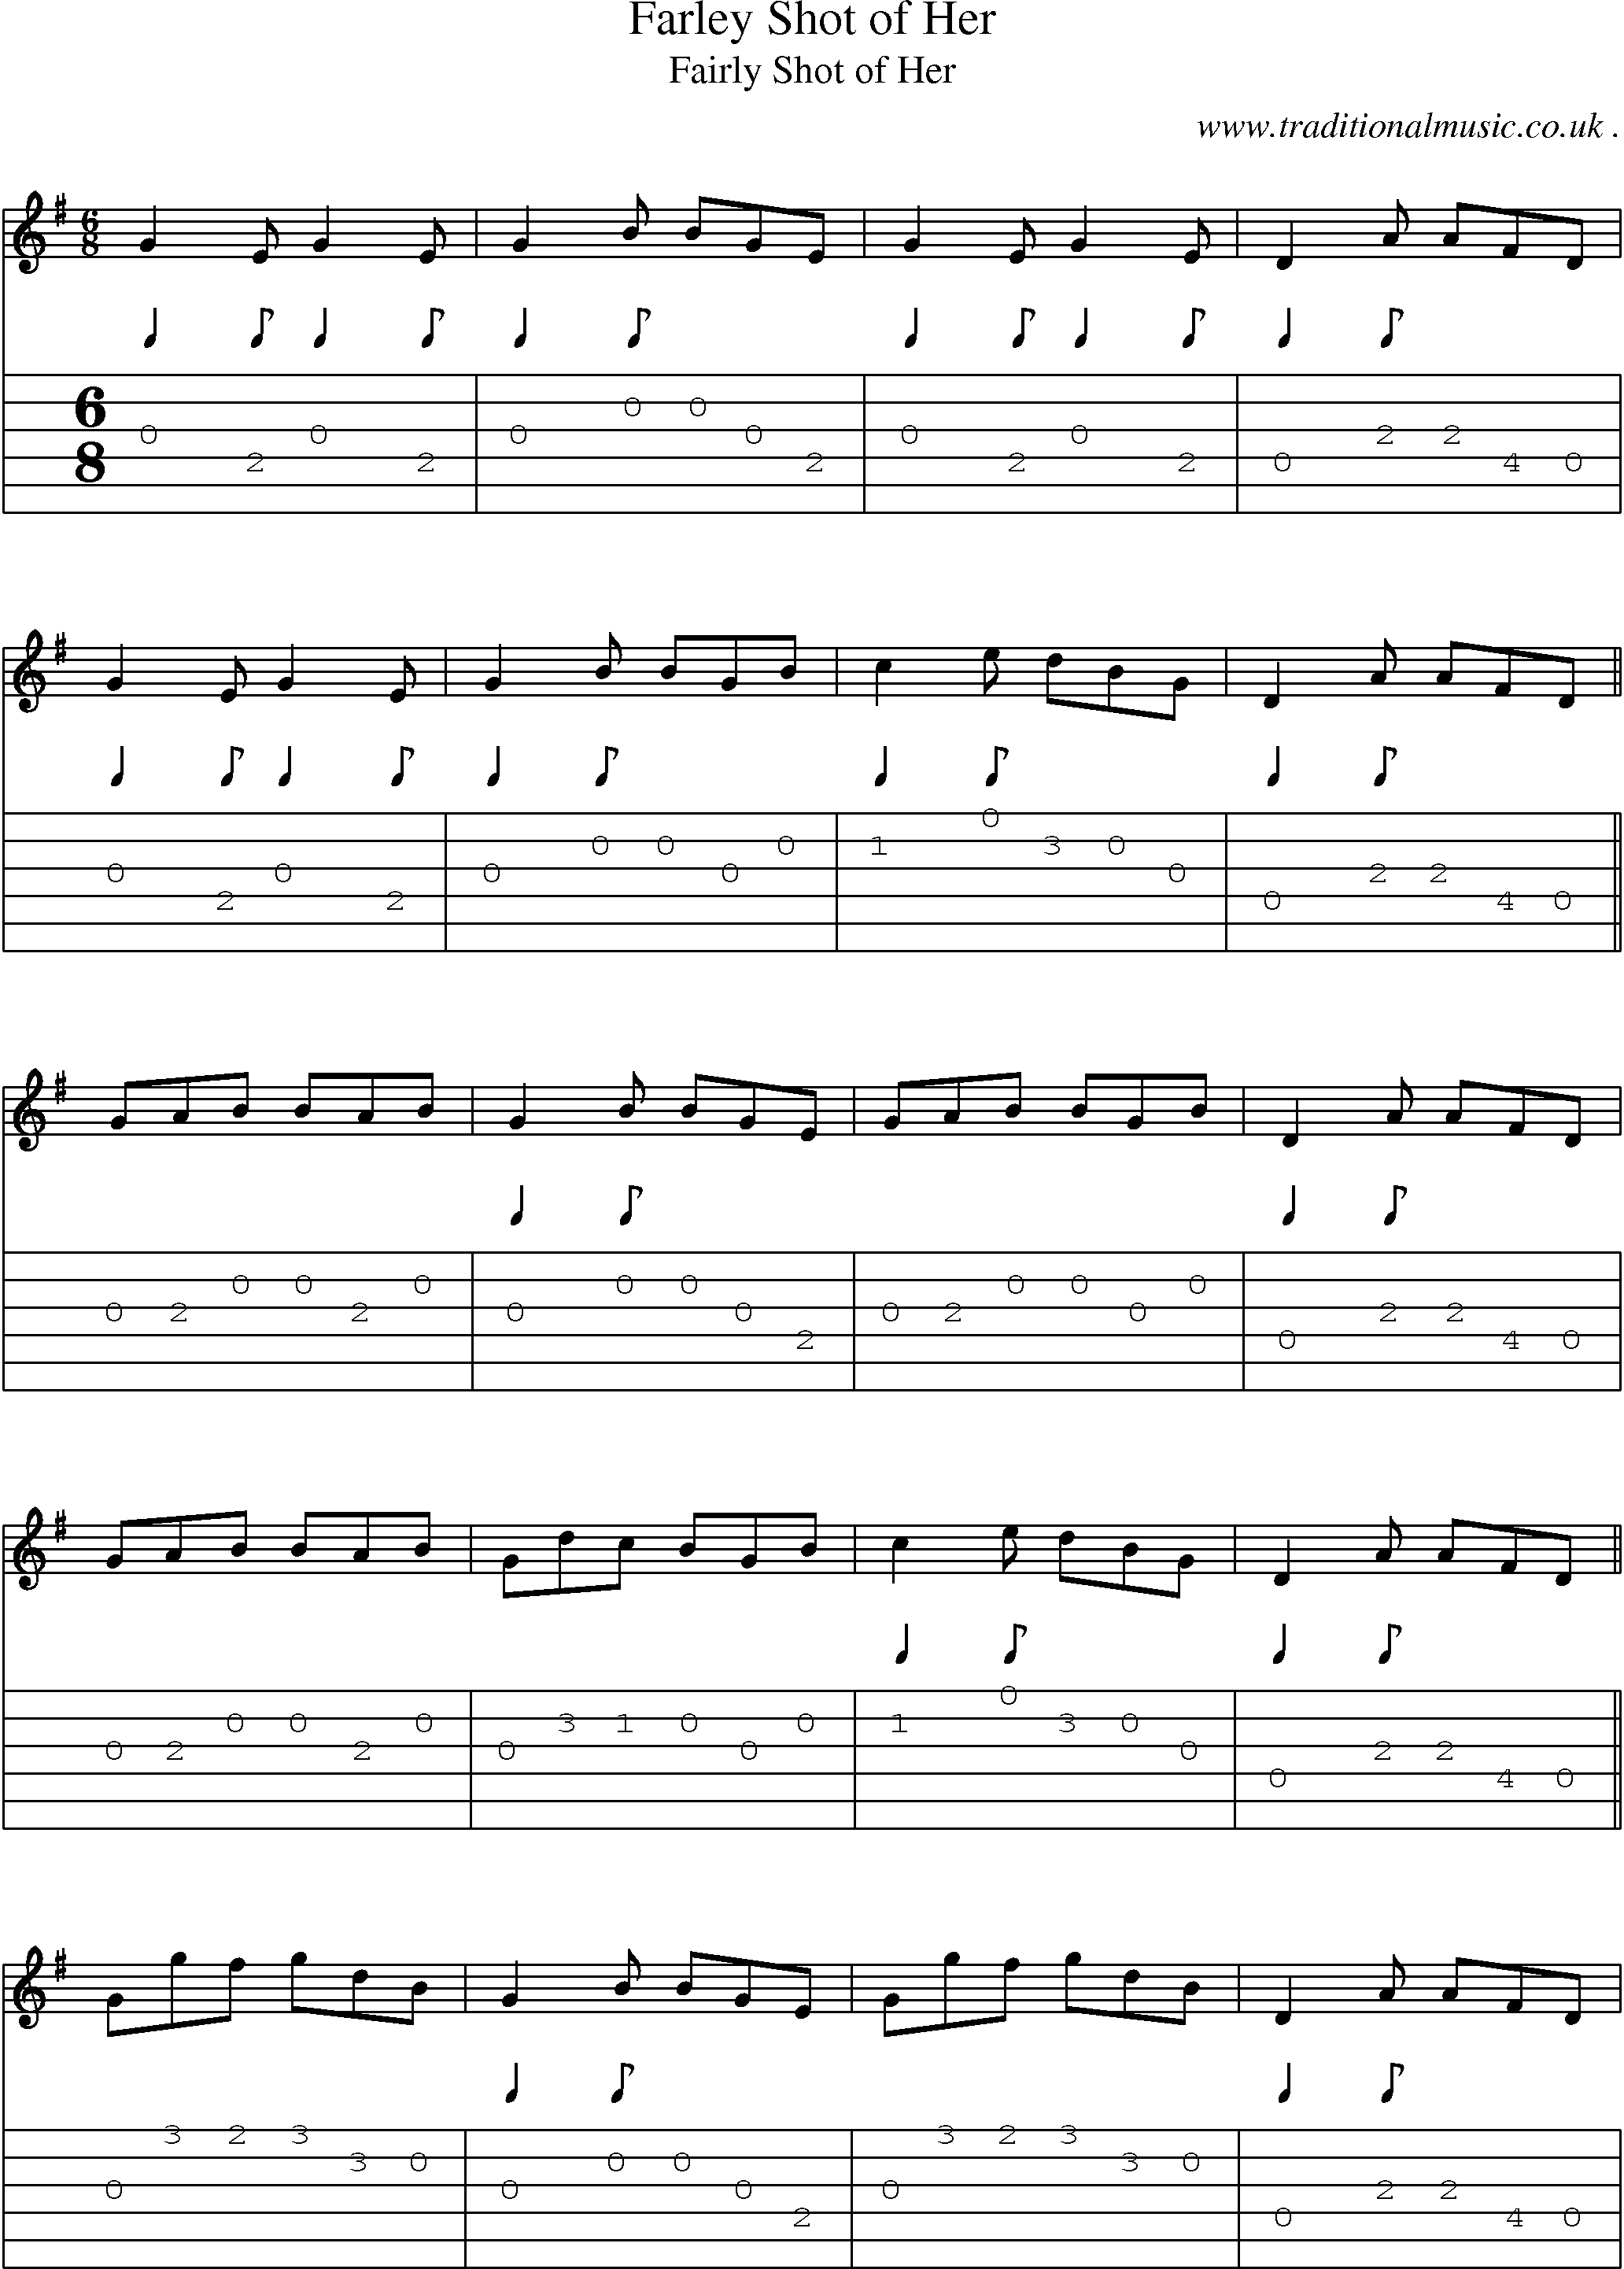 Sheet-Music and Guitar Tabs for Farley Shot Of Her